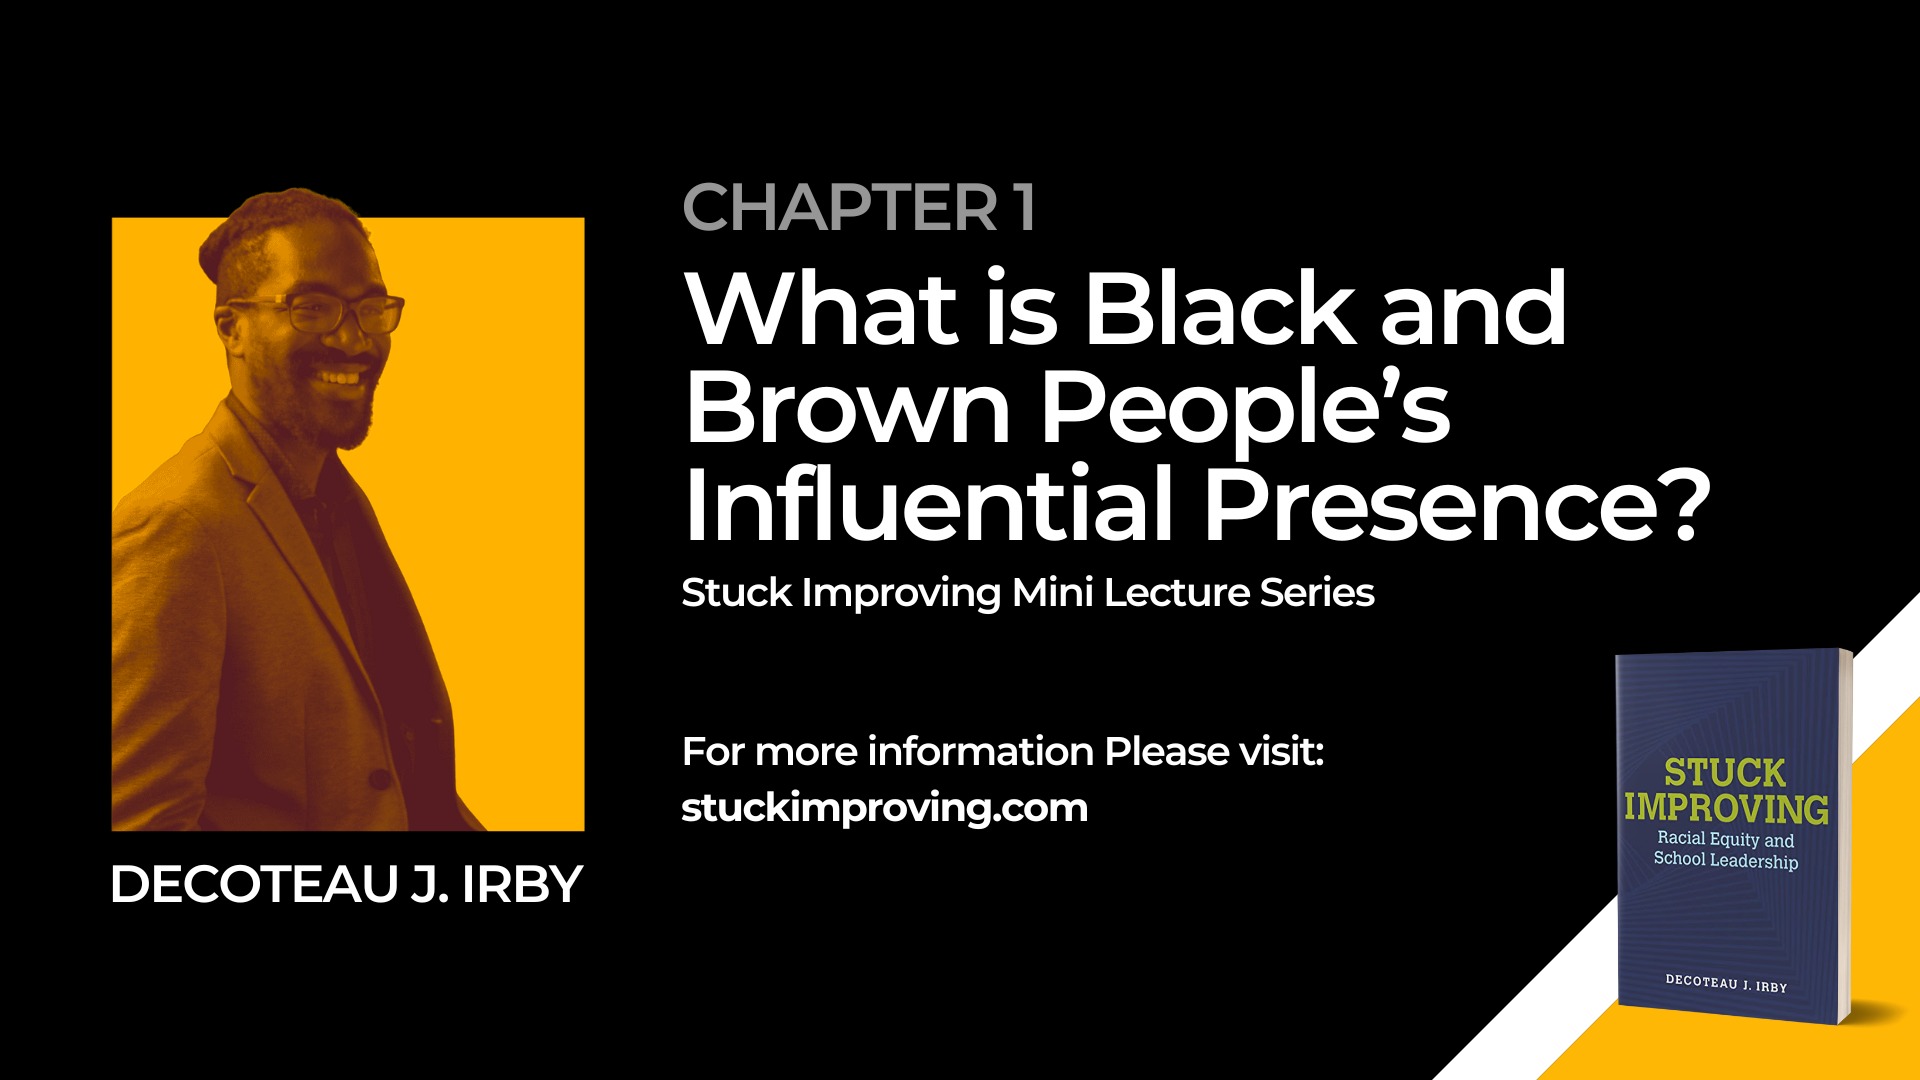 Chapter 1: What is Black and Brown People's Influential Presence?